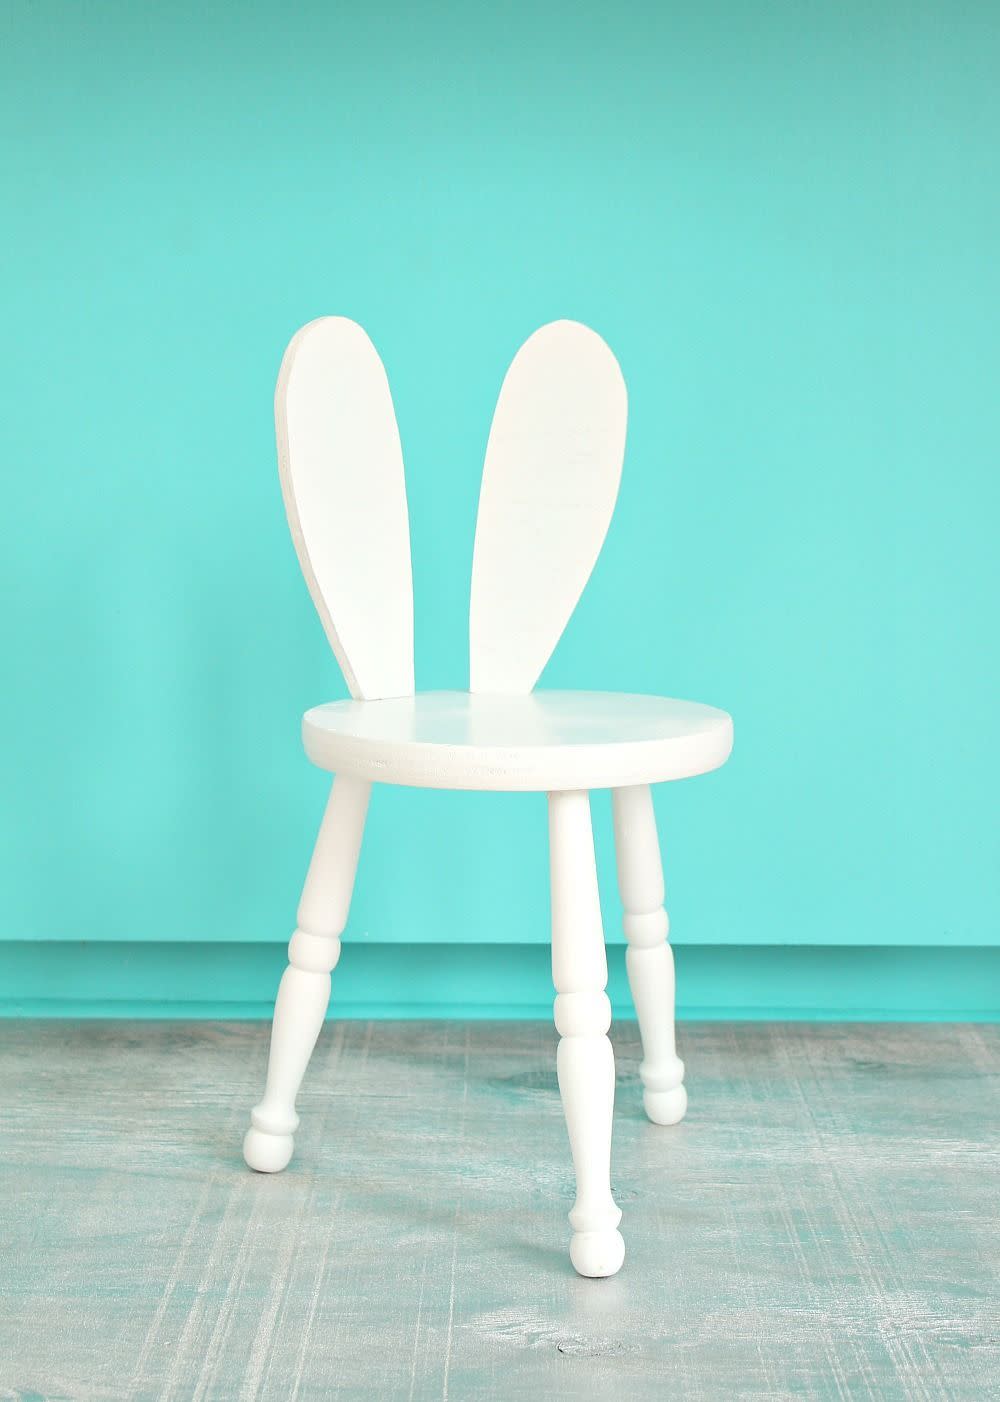 stool with bunny ears for back